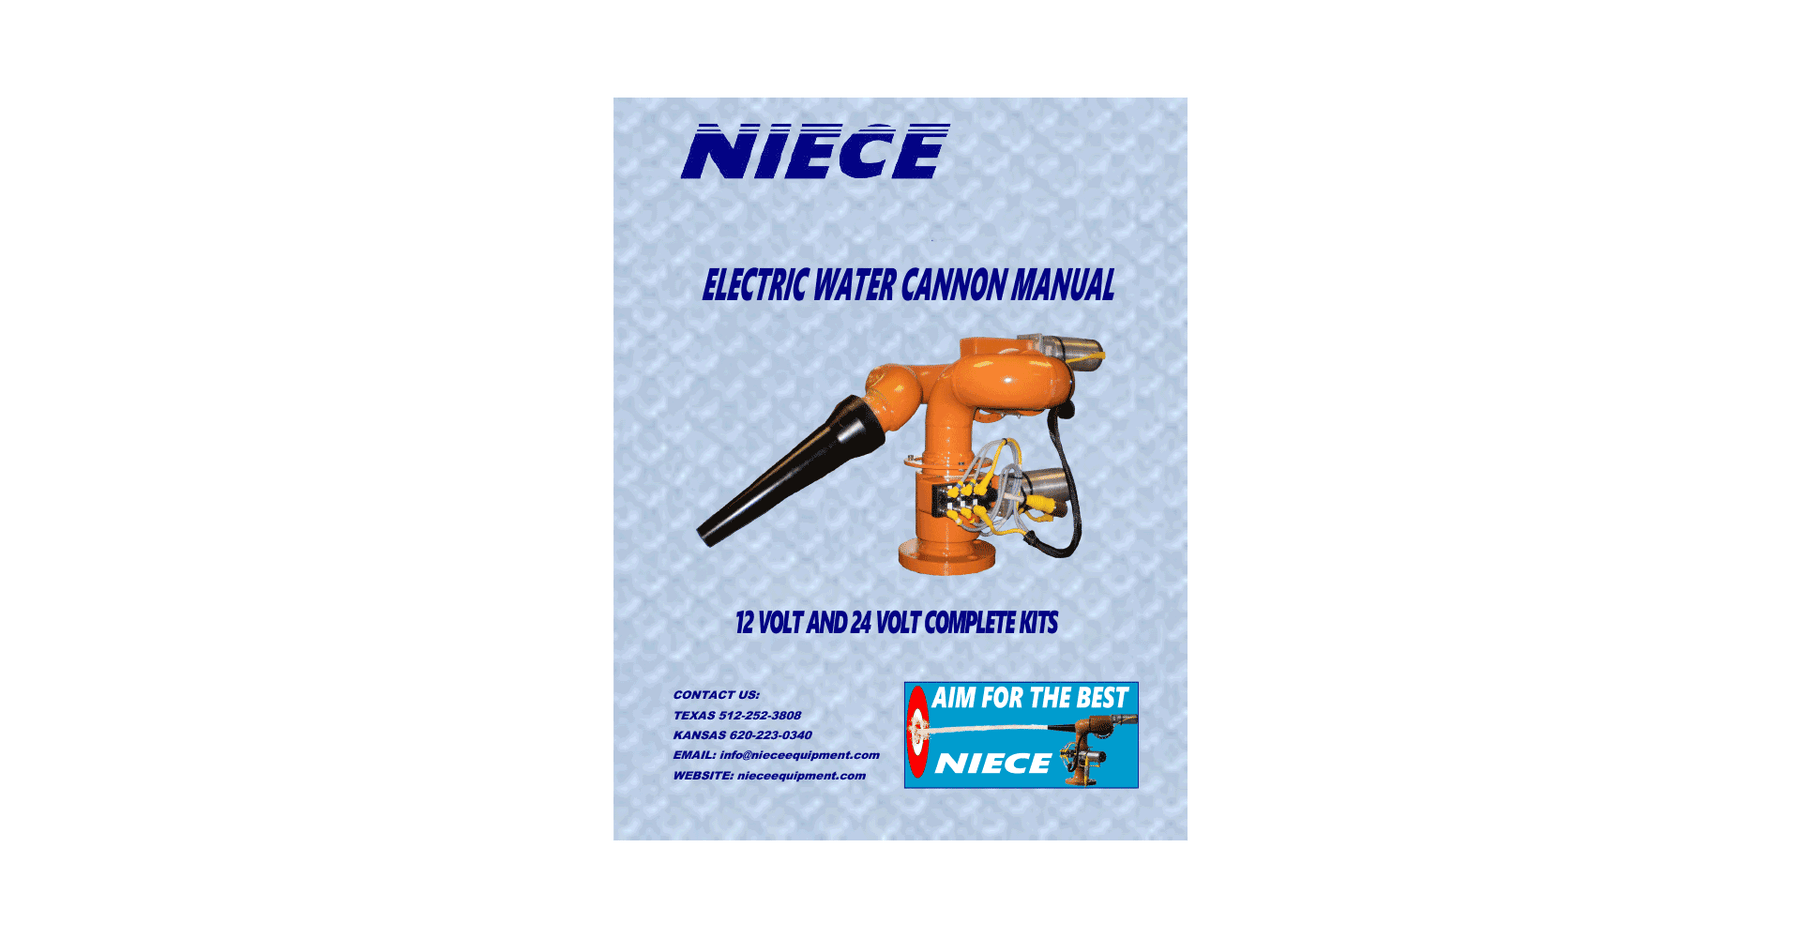 Niece Electric Water Cannon Manual